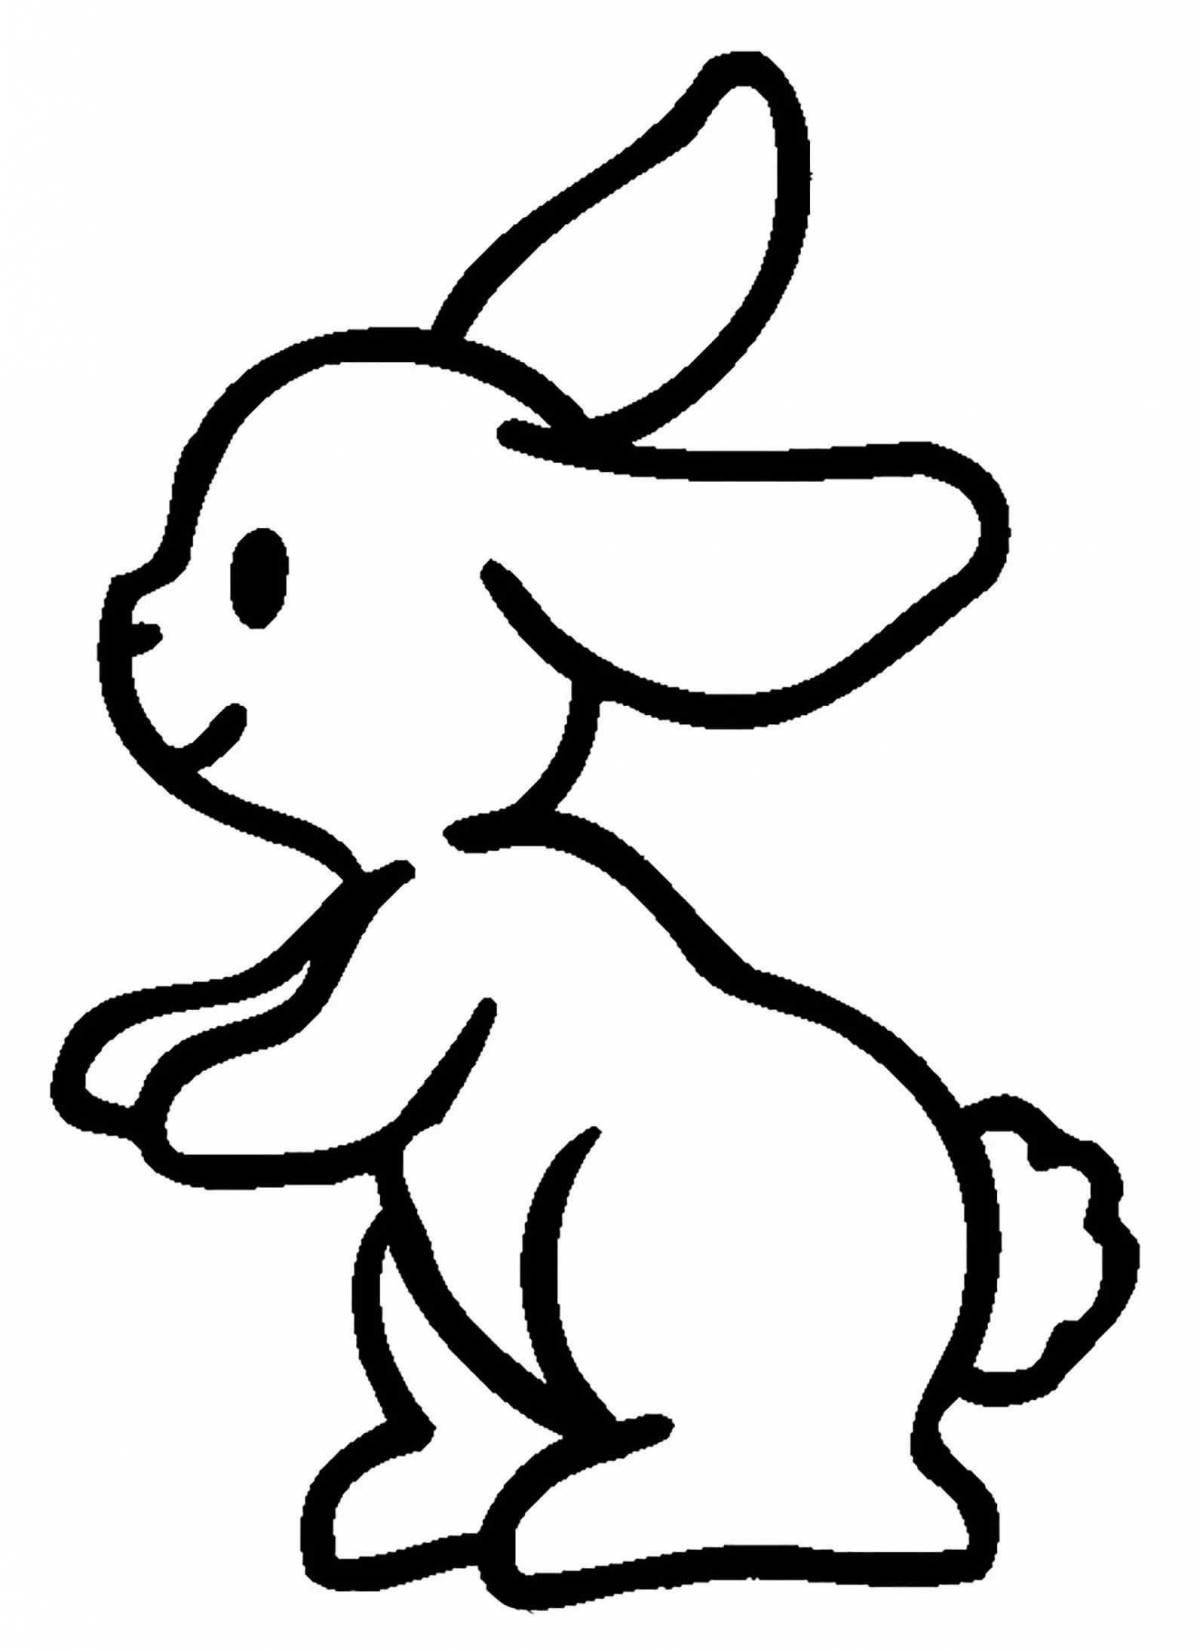 Adorable hare pattern coloring page